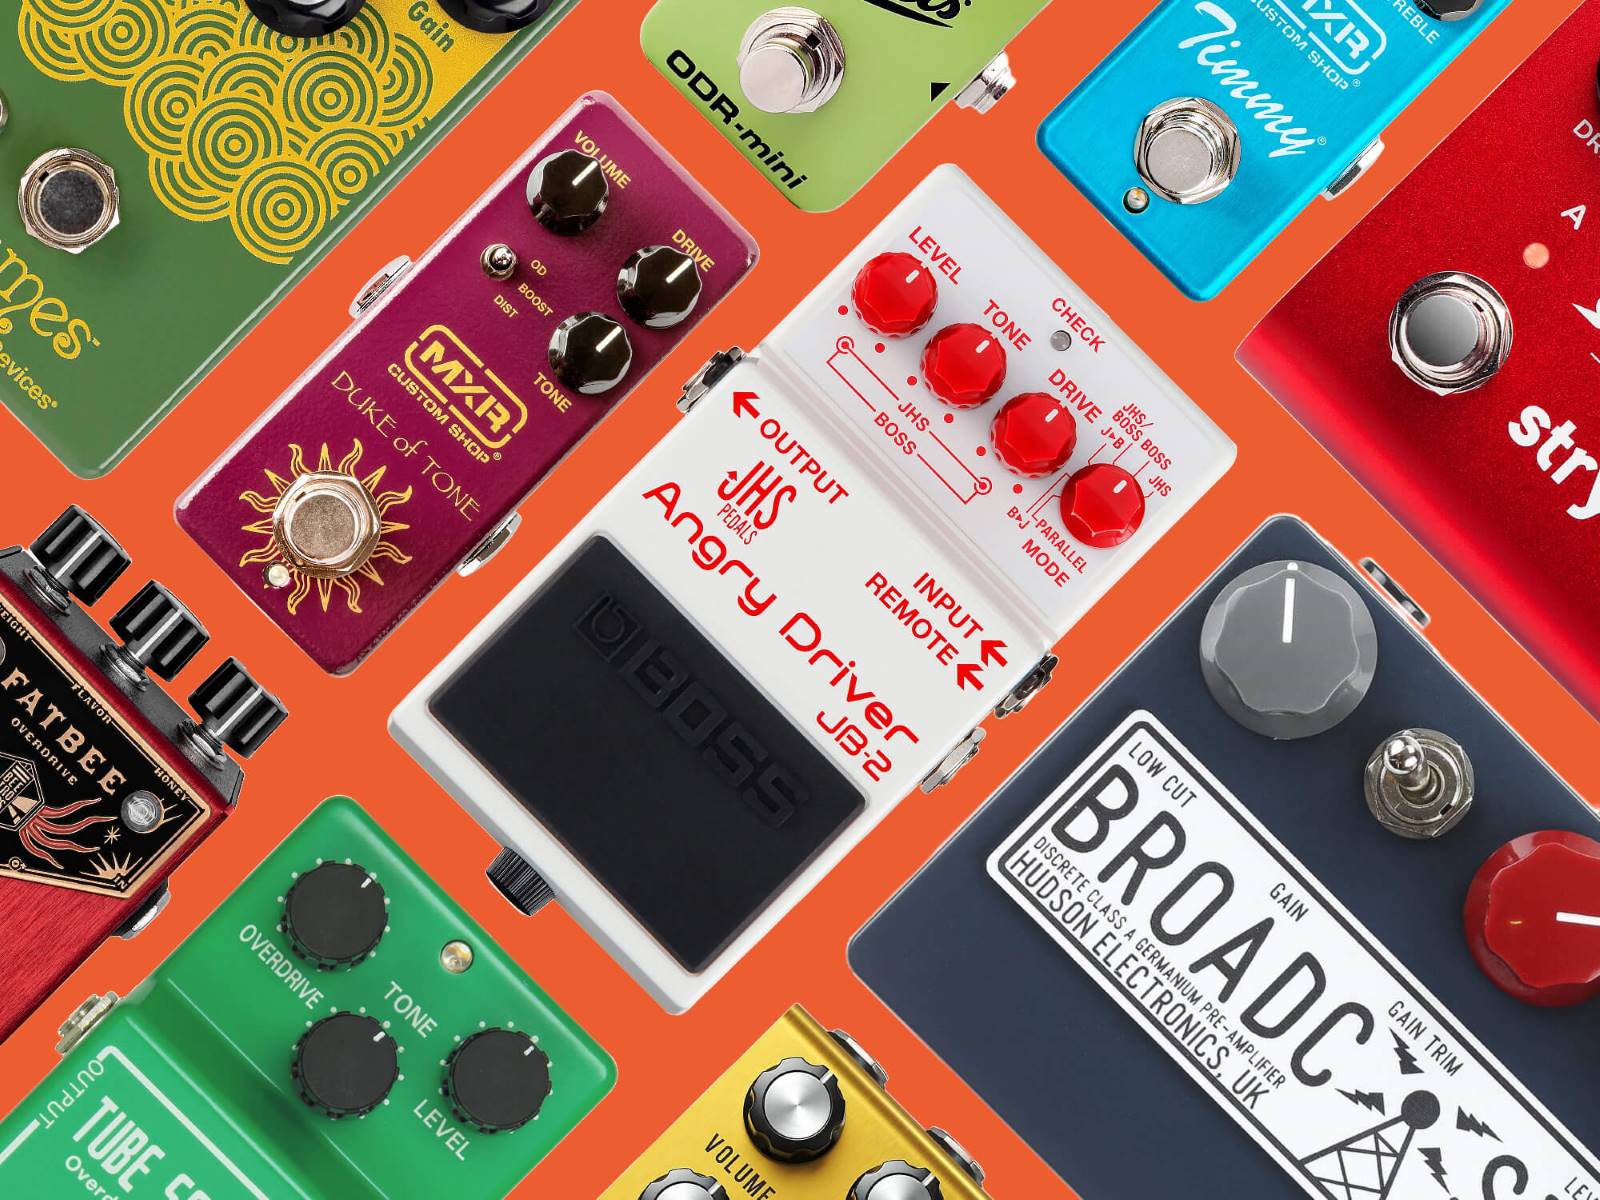 The Ultimate Overdrive Pedal: Preserve Your Tone While Mastering Guitar Volume!